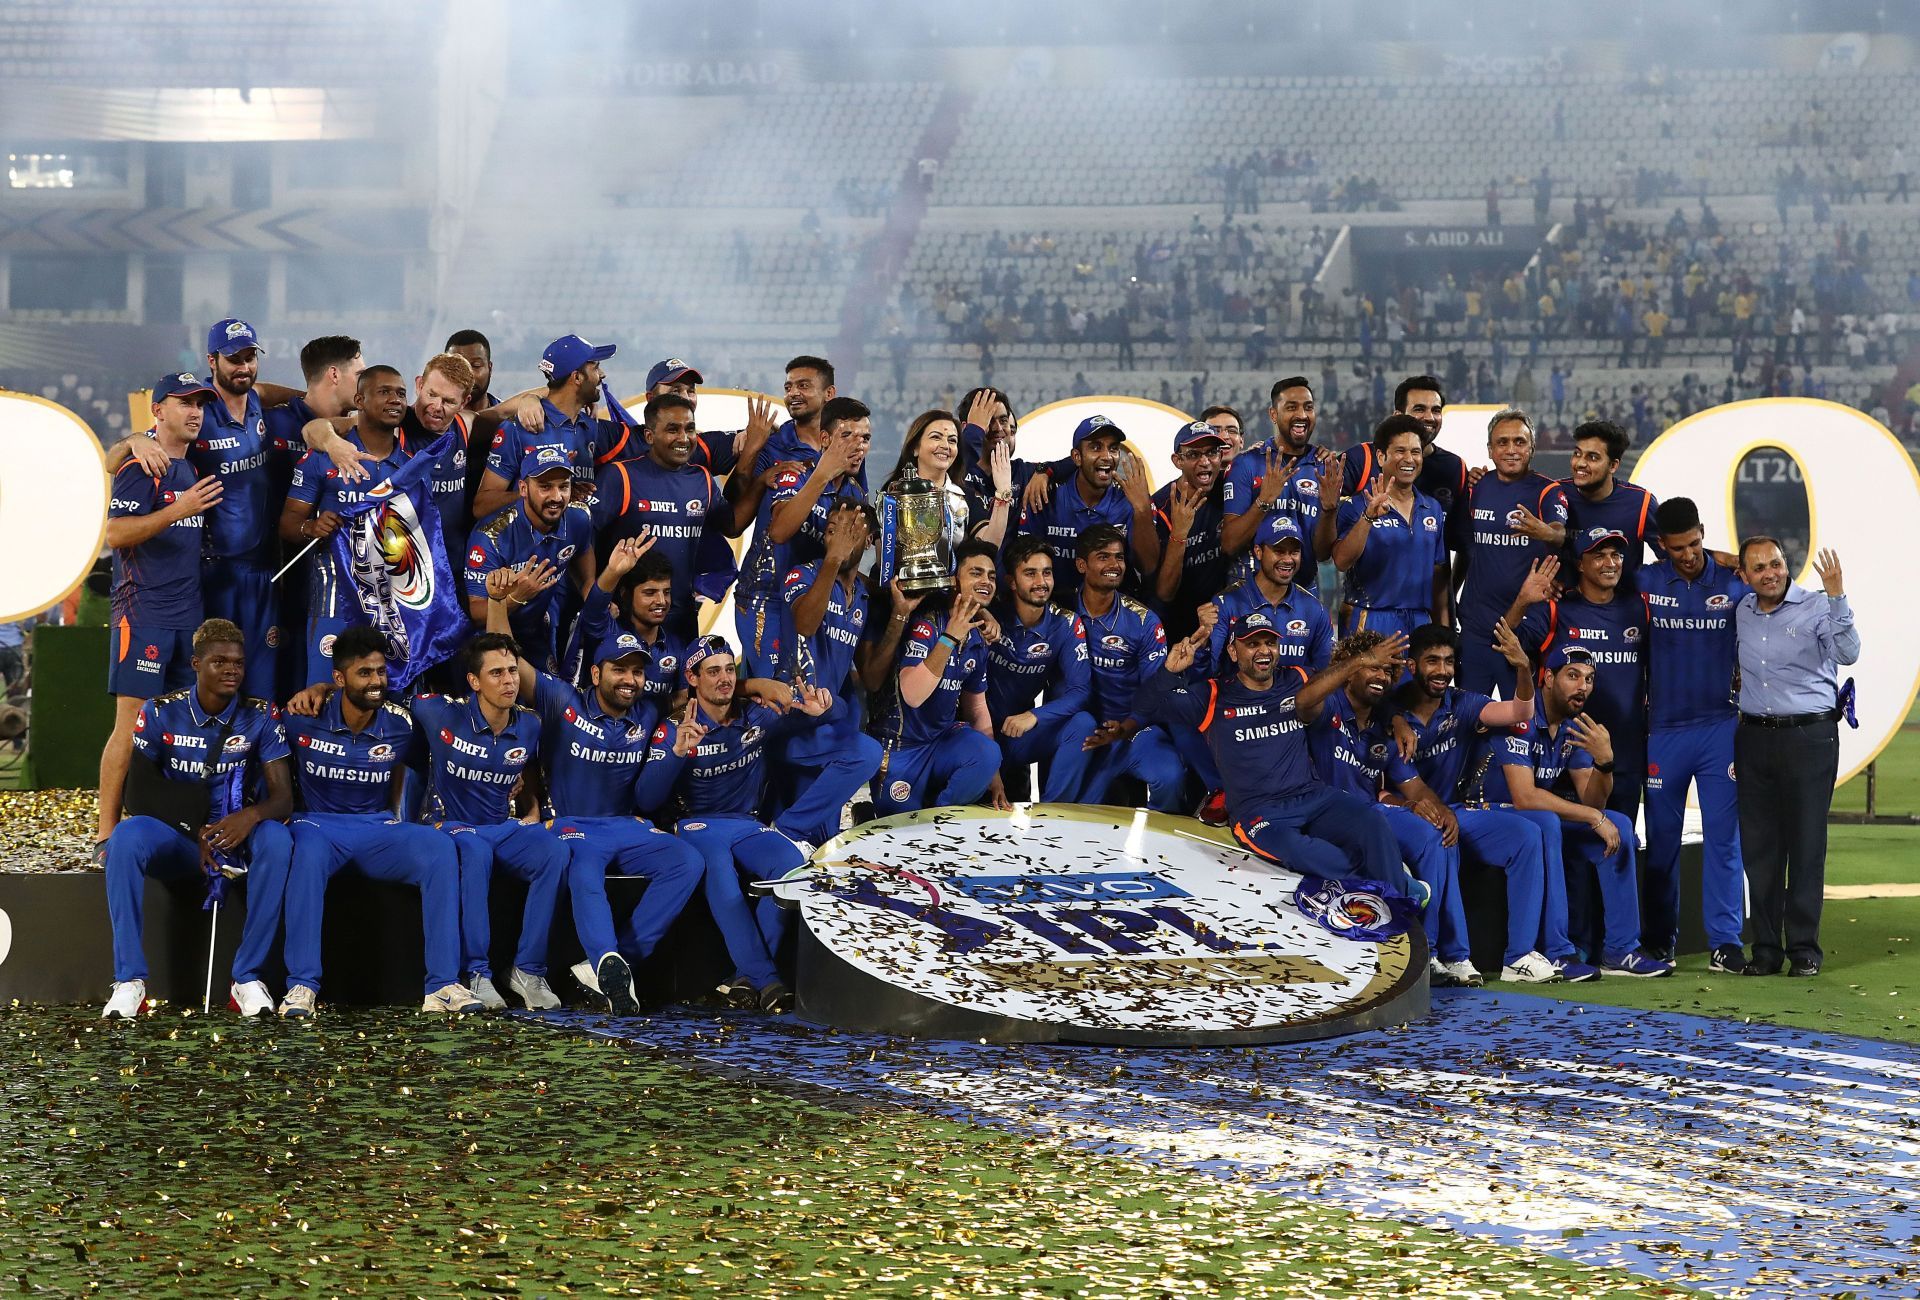 Mumbai Indians tasted a lot of success in the previous cycle of IPL seasons